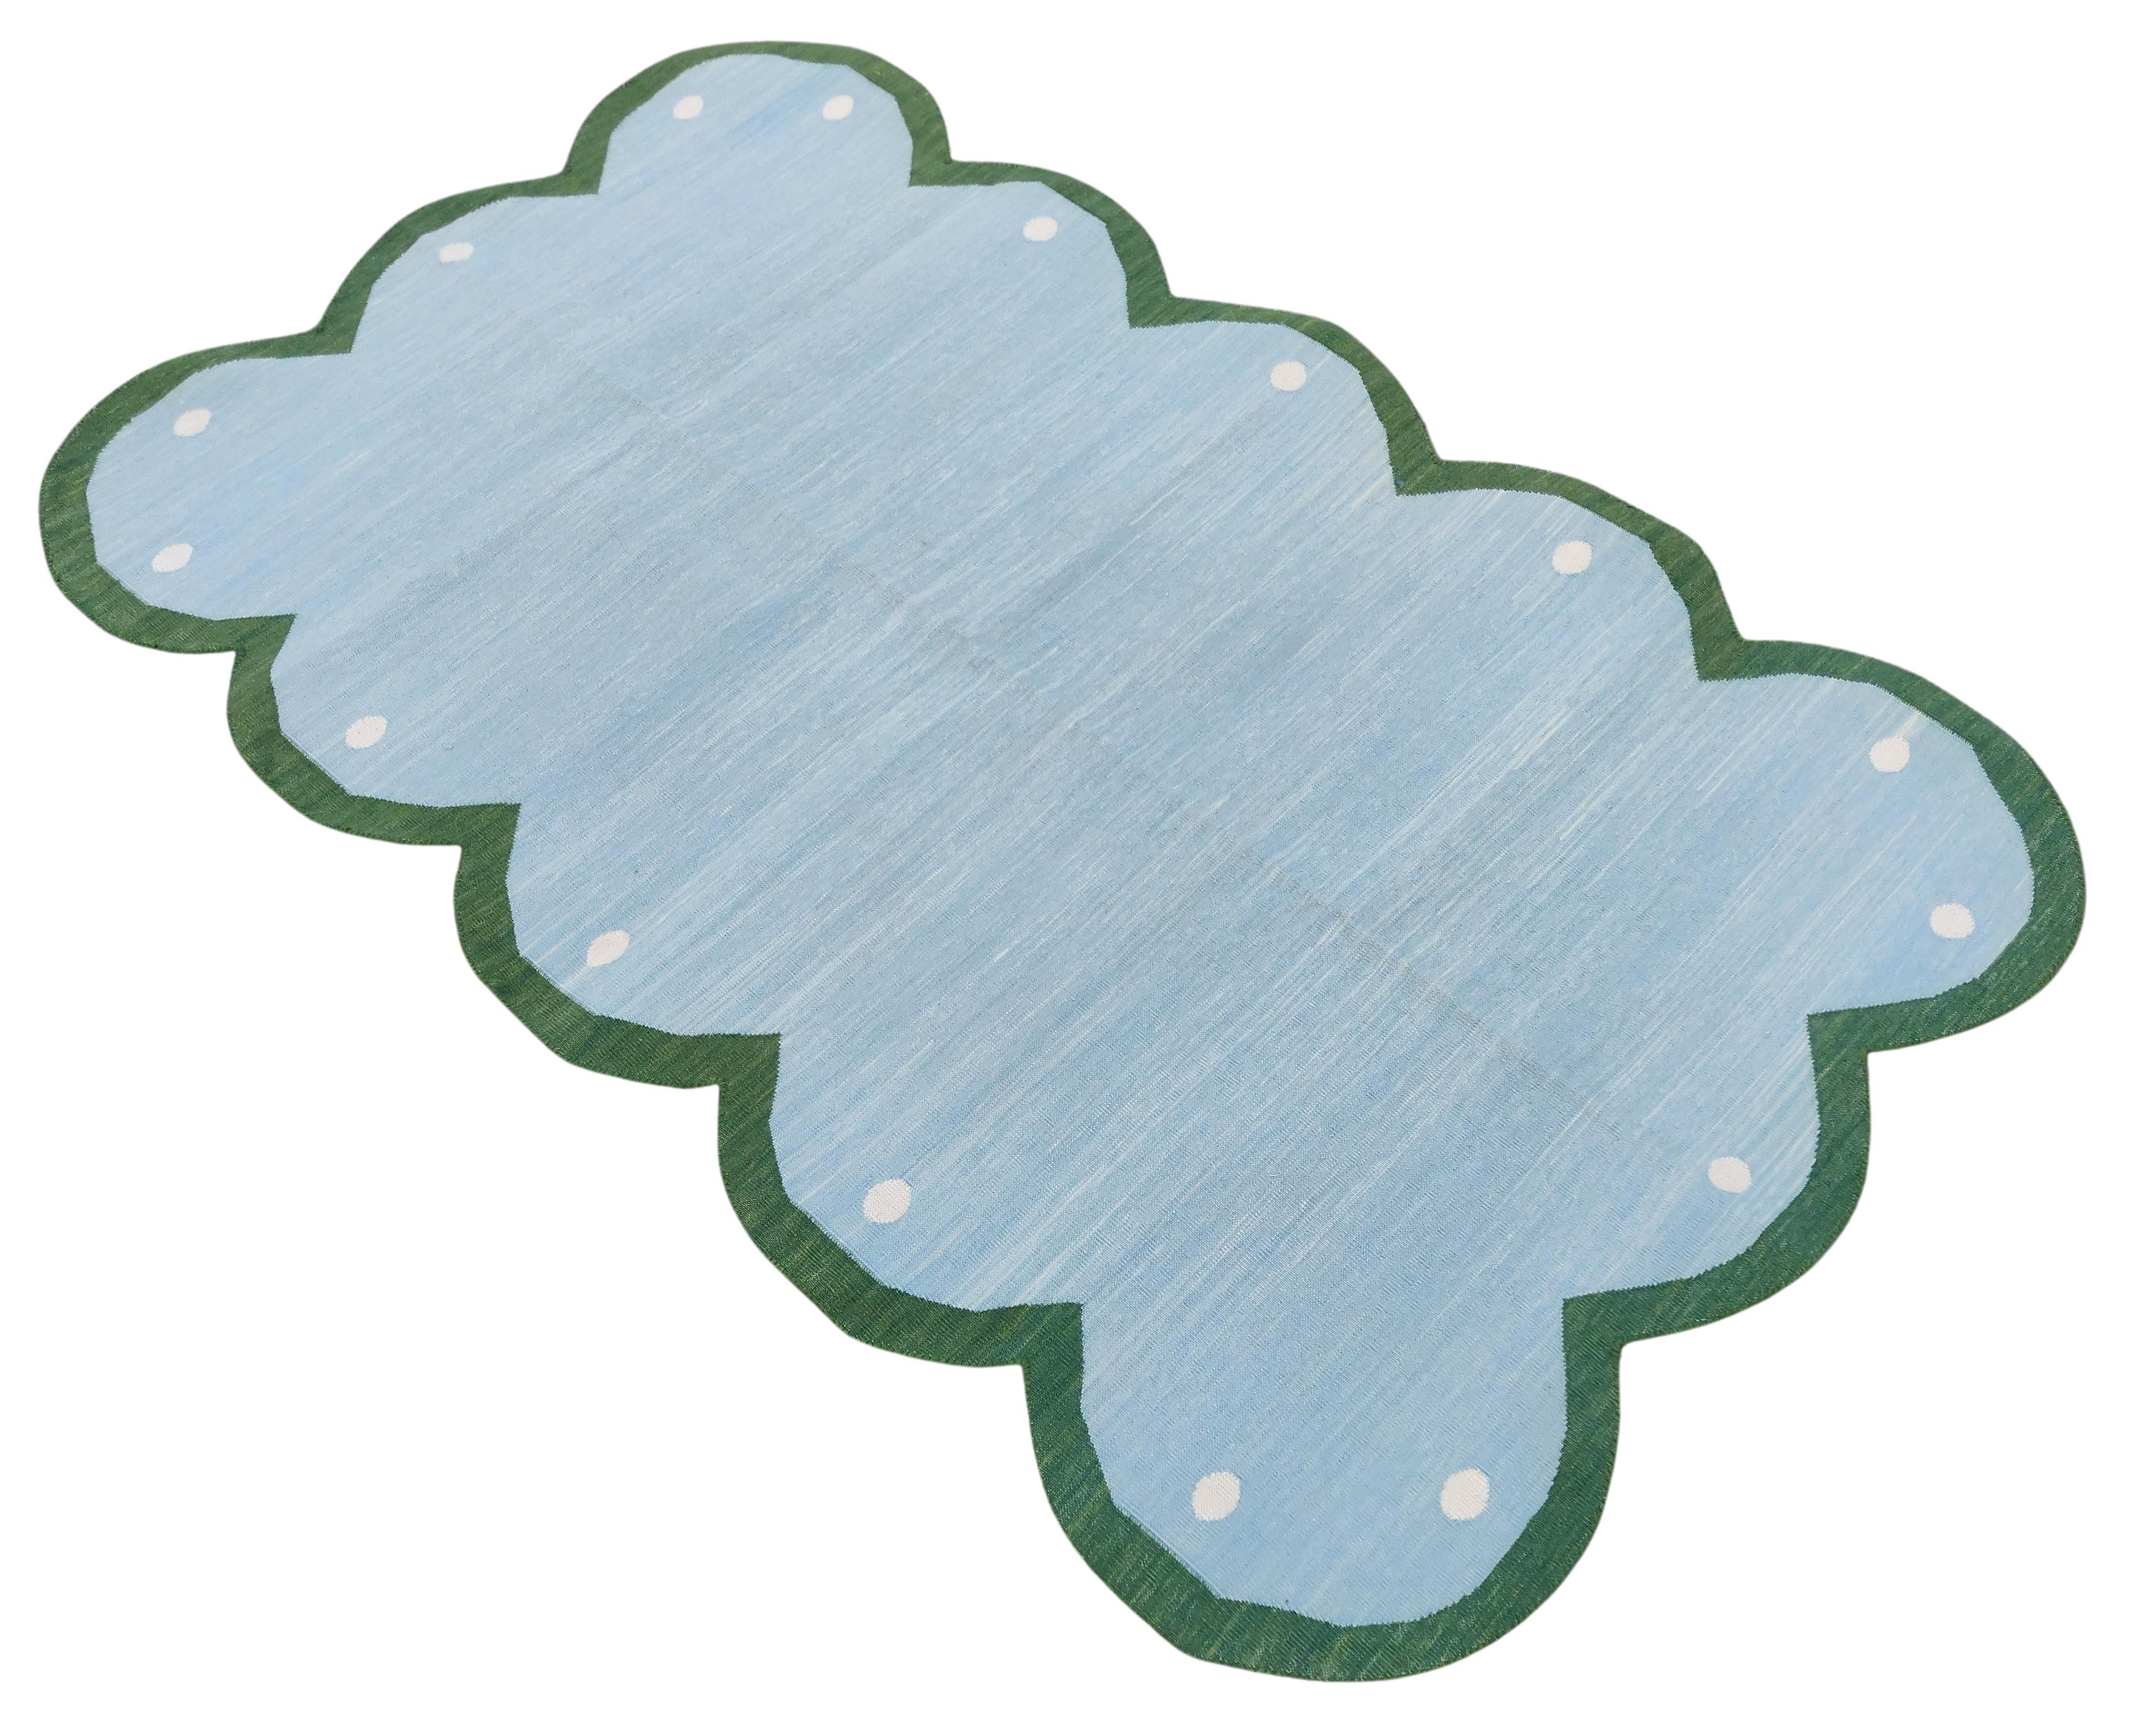 Cotton Vegetable Dyed Sky Blue & Forest Green Four Sided Scalloped Rug-4'x6' (Scallops runs on all 4 Sides)
These special flat-weave dhurries are hand-woven with 15 ply 100% cotton yarn. Due to the special manufacturing techniques used to create our